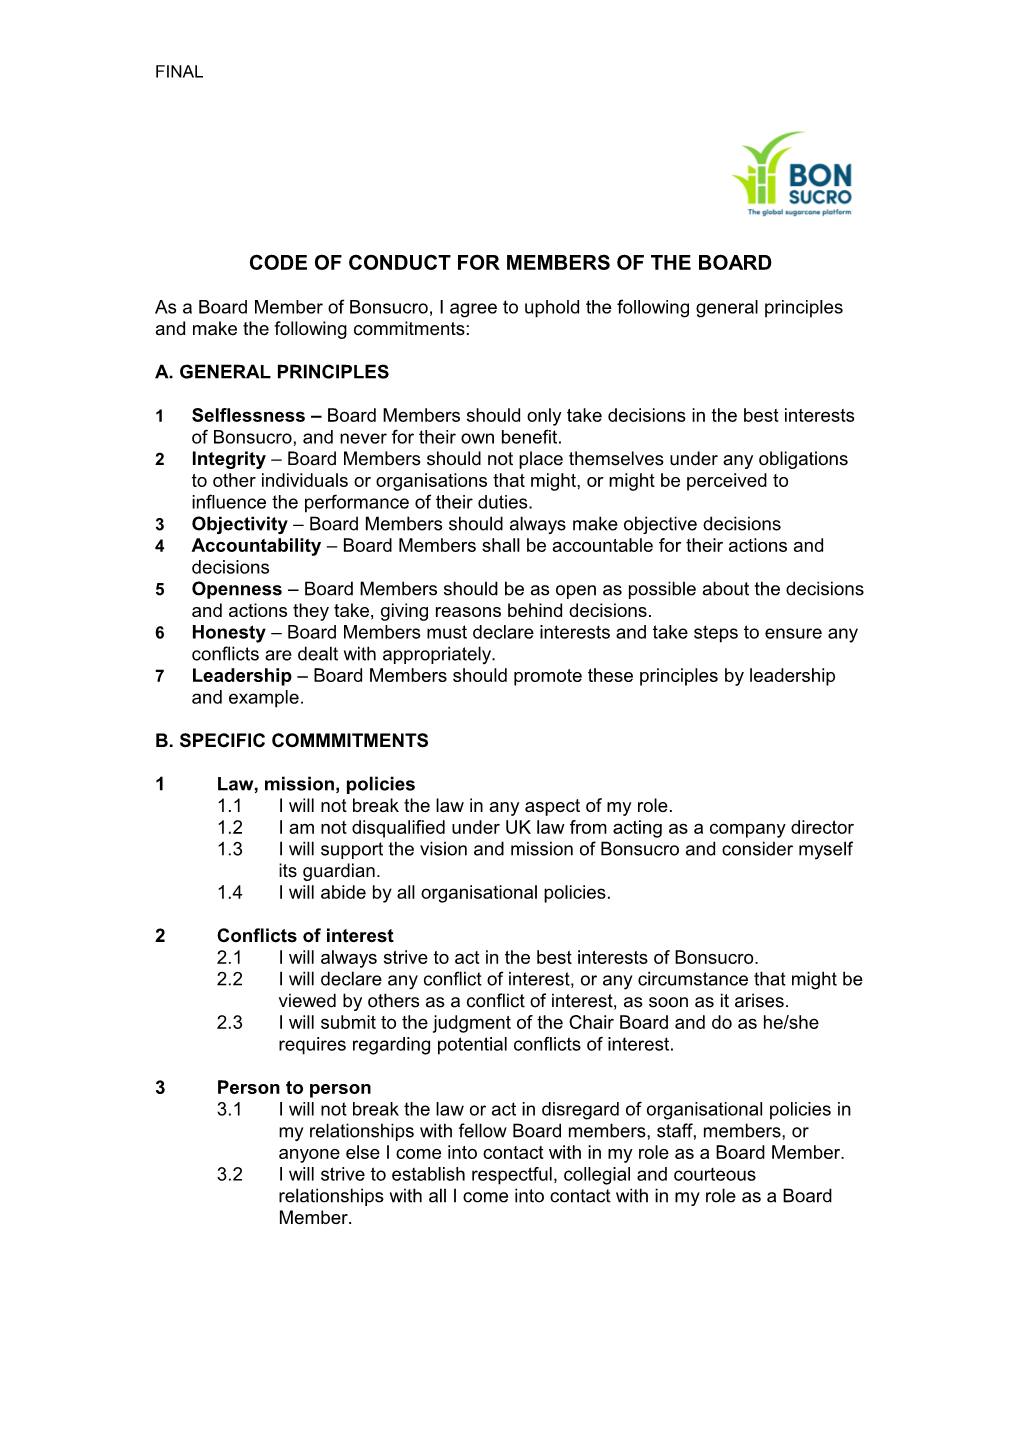 Code of Conduct for Members of the Board